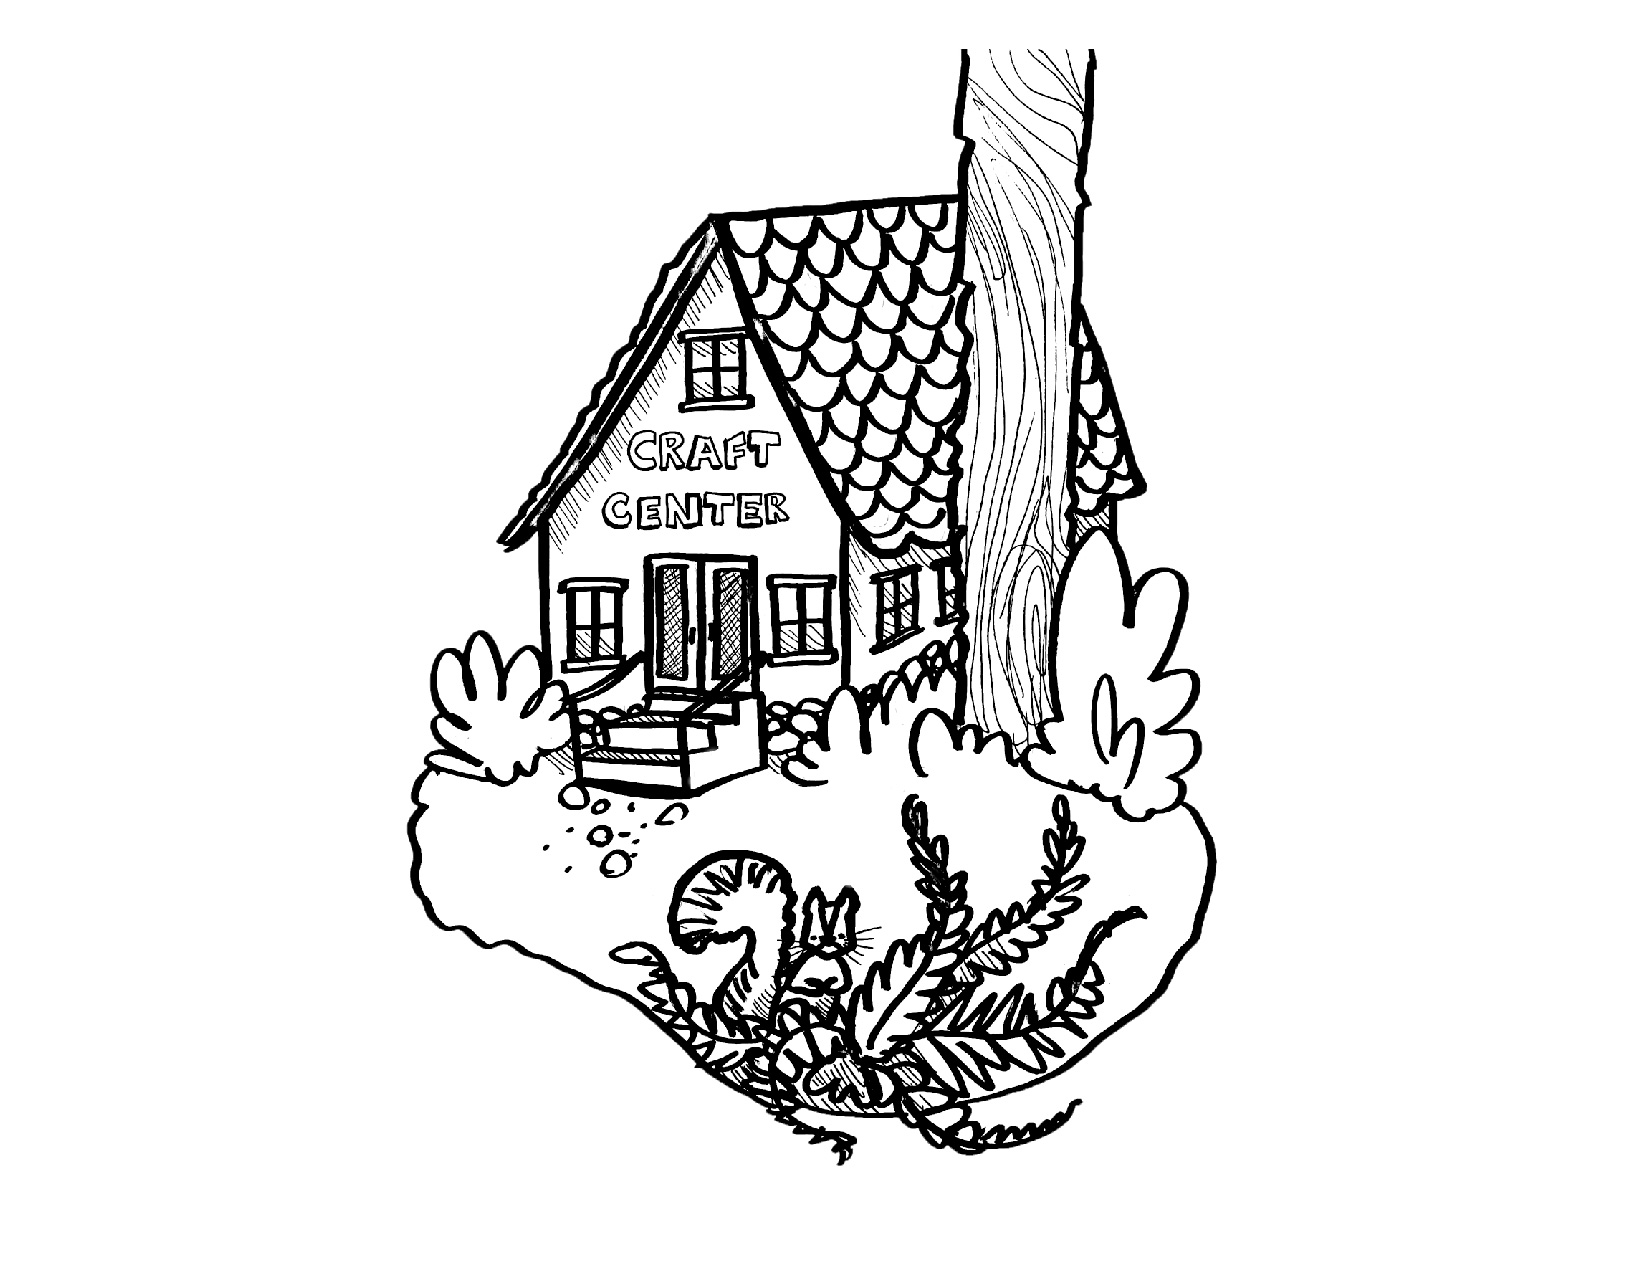 Coloring Page of a Craft Center